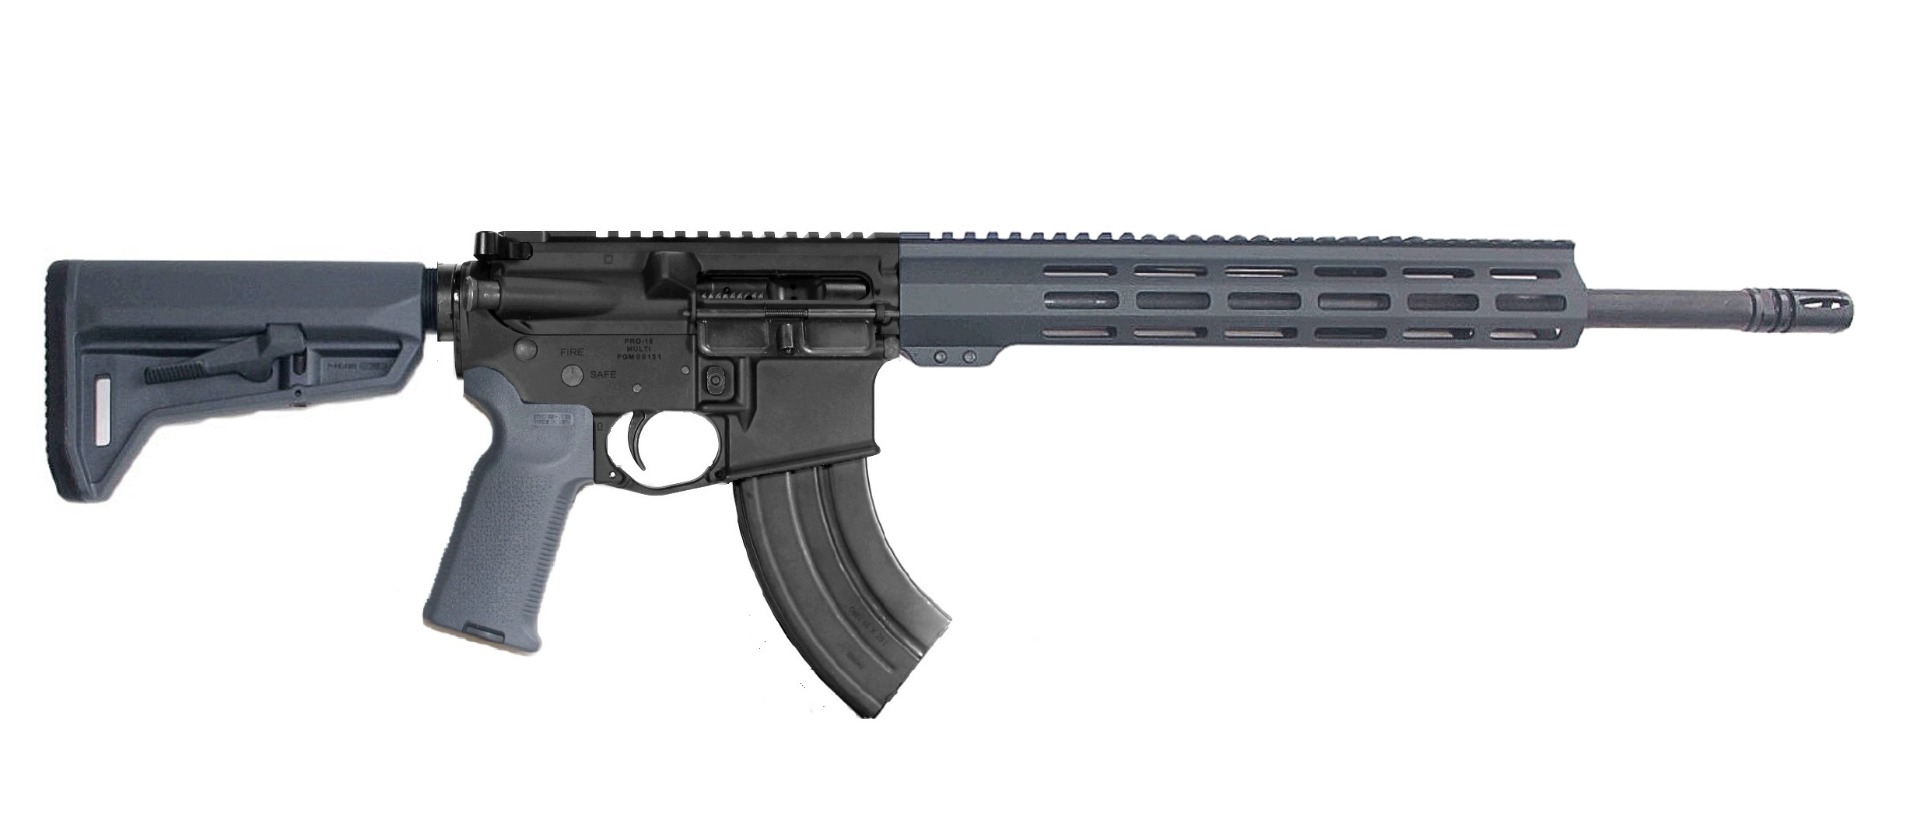 16 inch 7.62x39 AR-15 Rifle | In Stock | Fast Shipping